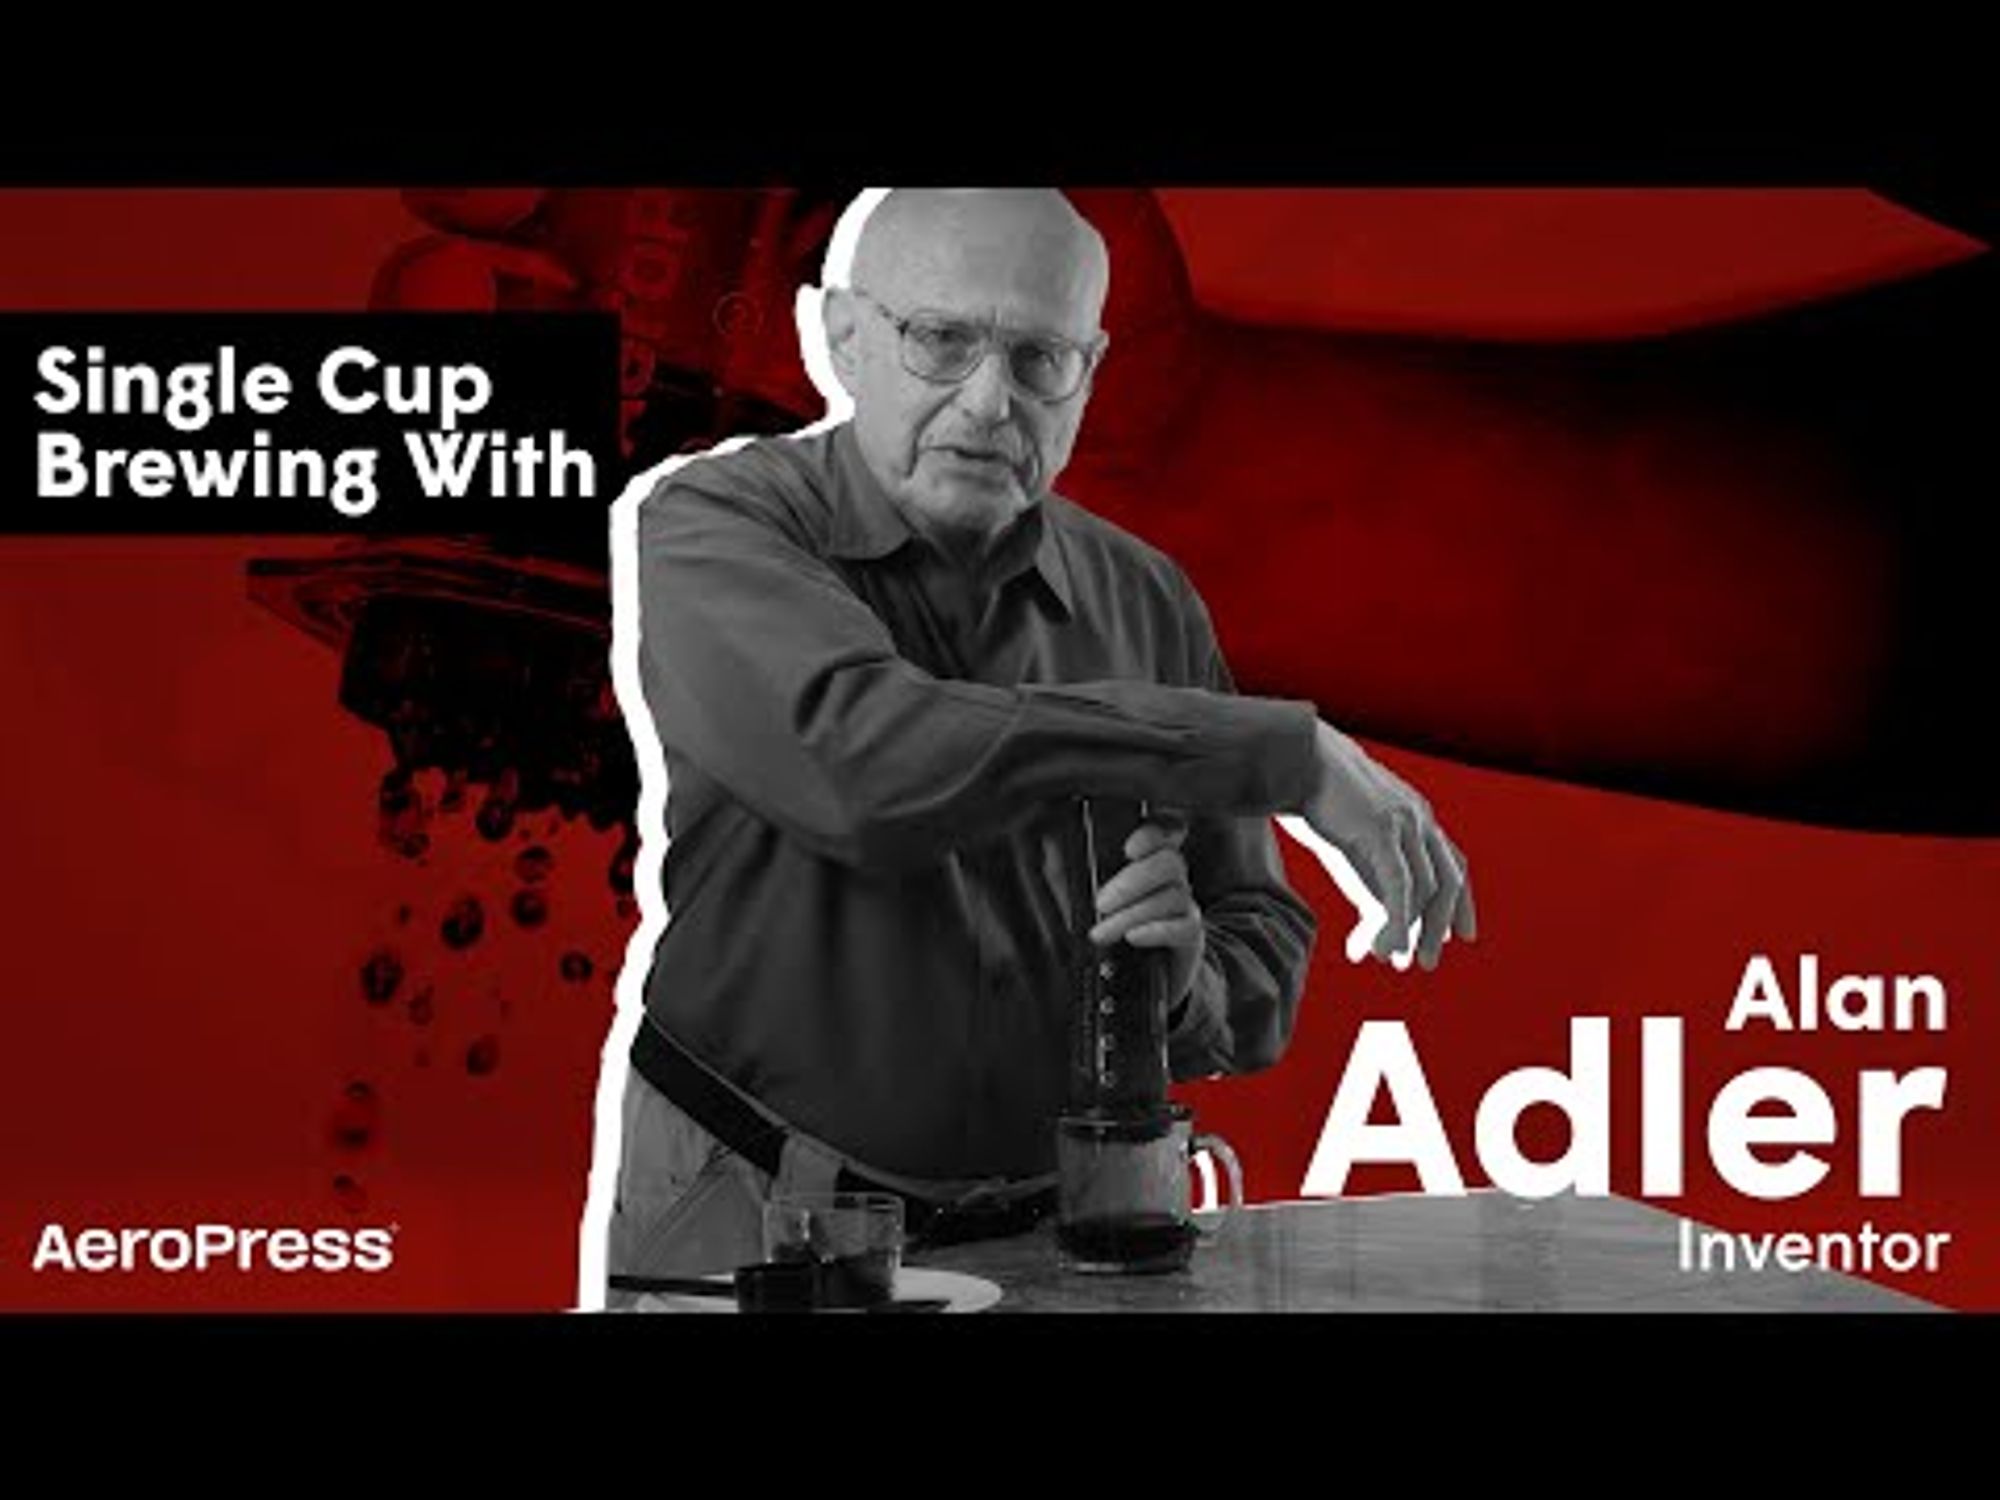 Brewing with Inventor Alan Adler (Single Cup)